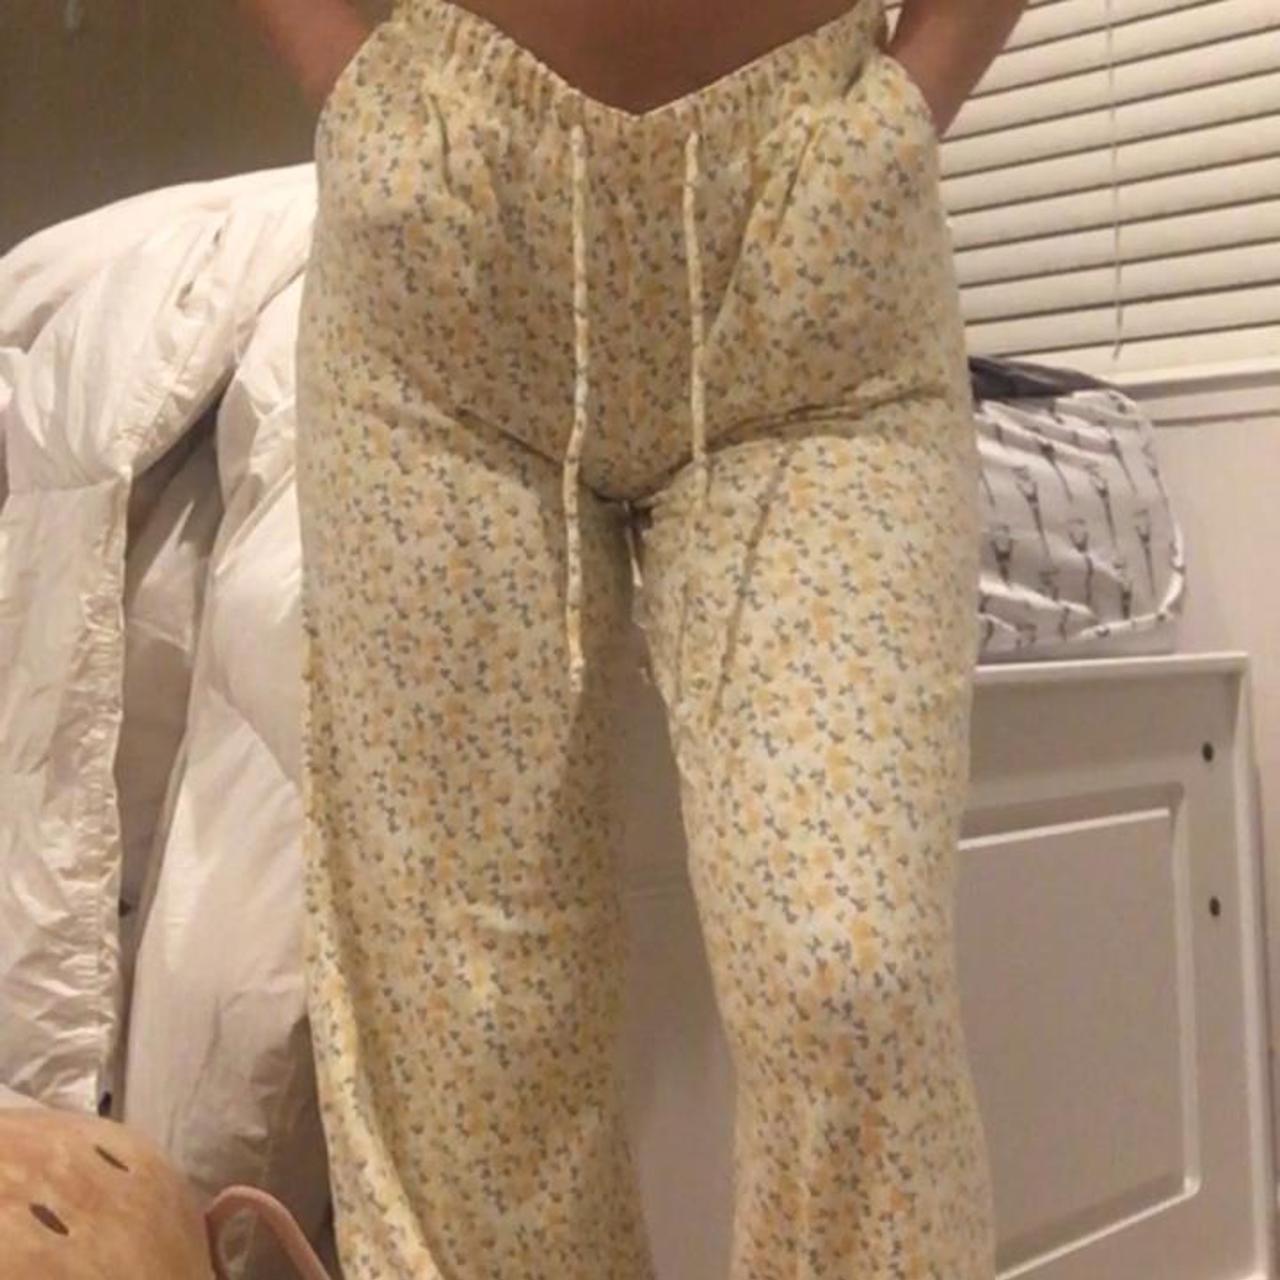 Product Image 2 - 🌻 soft pajama bottoms 🌻
sold